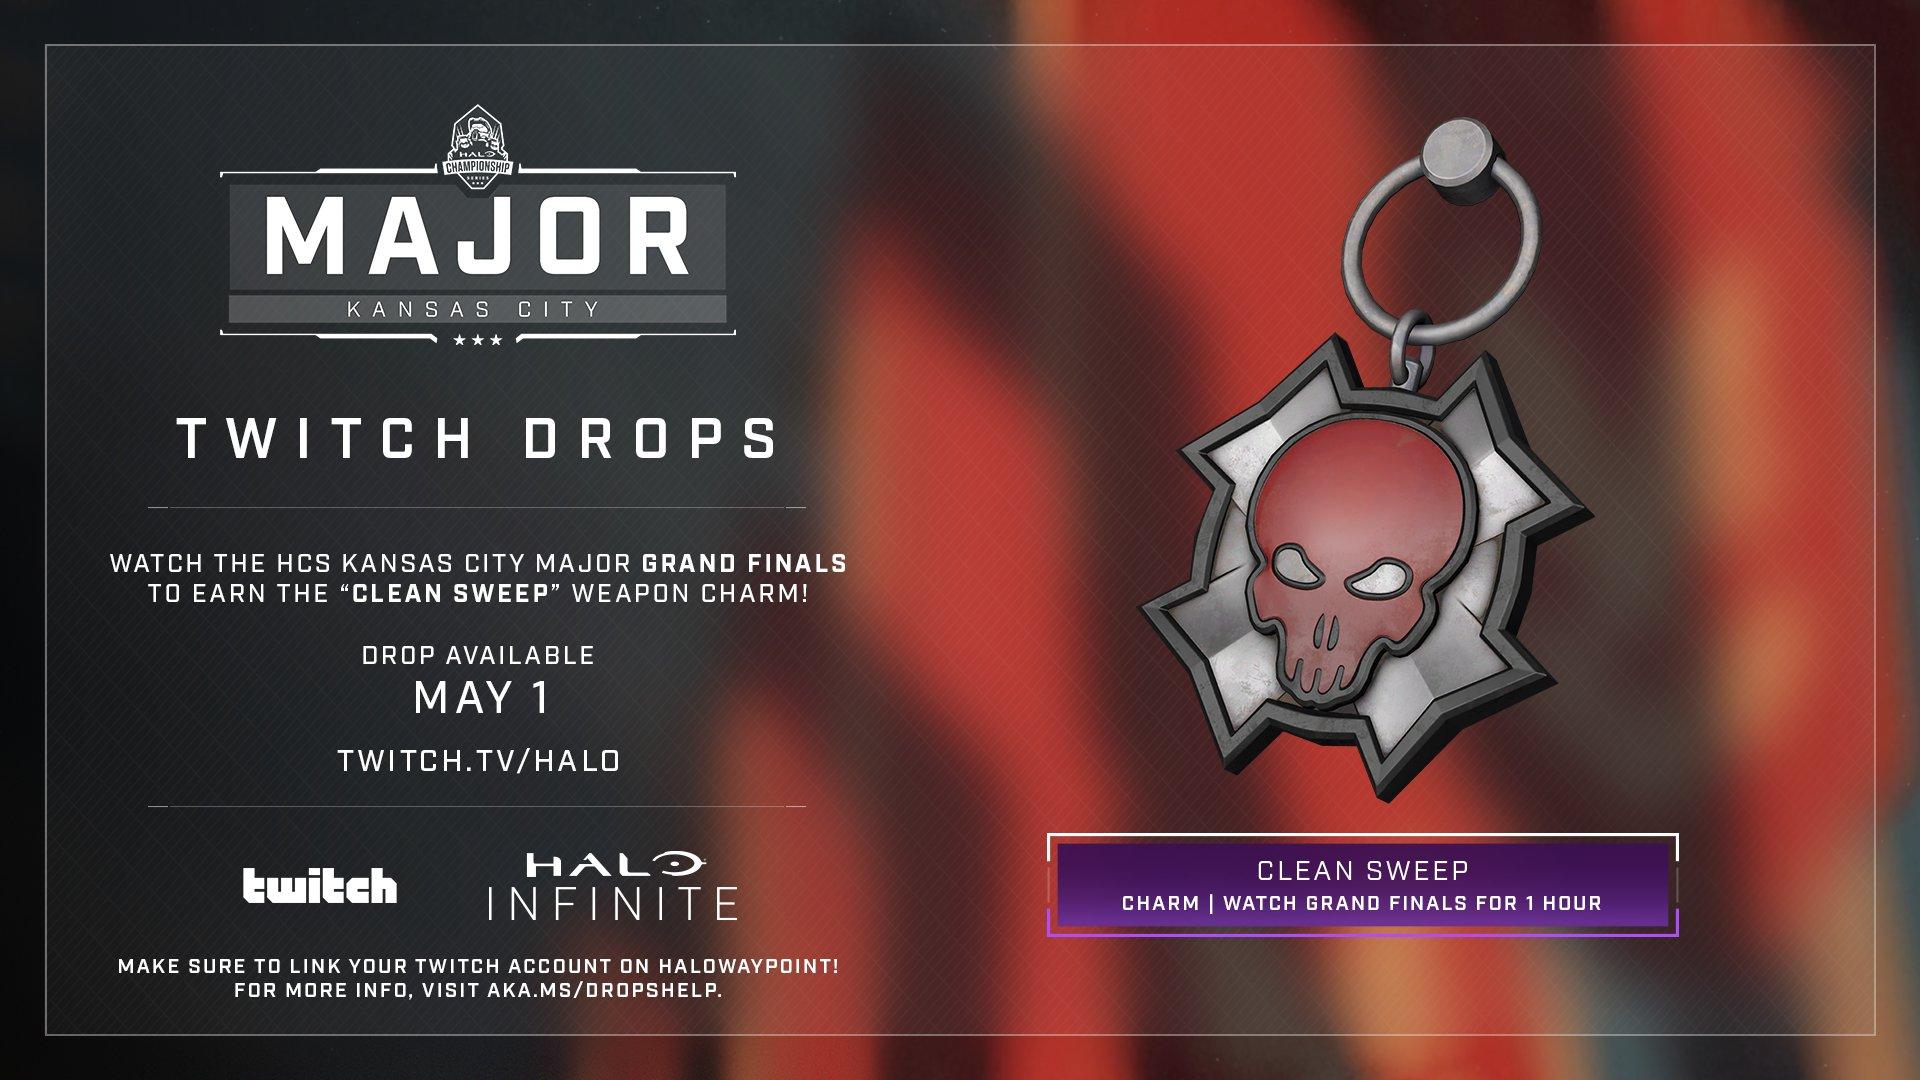 Business of Esports - 343 Industries Confirms Dates And Locations For HCS  Orlando And 2022 Halo World Championship